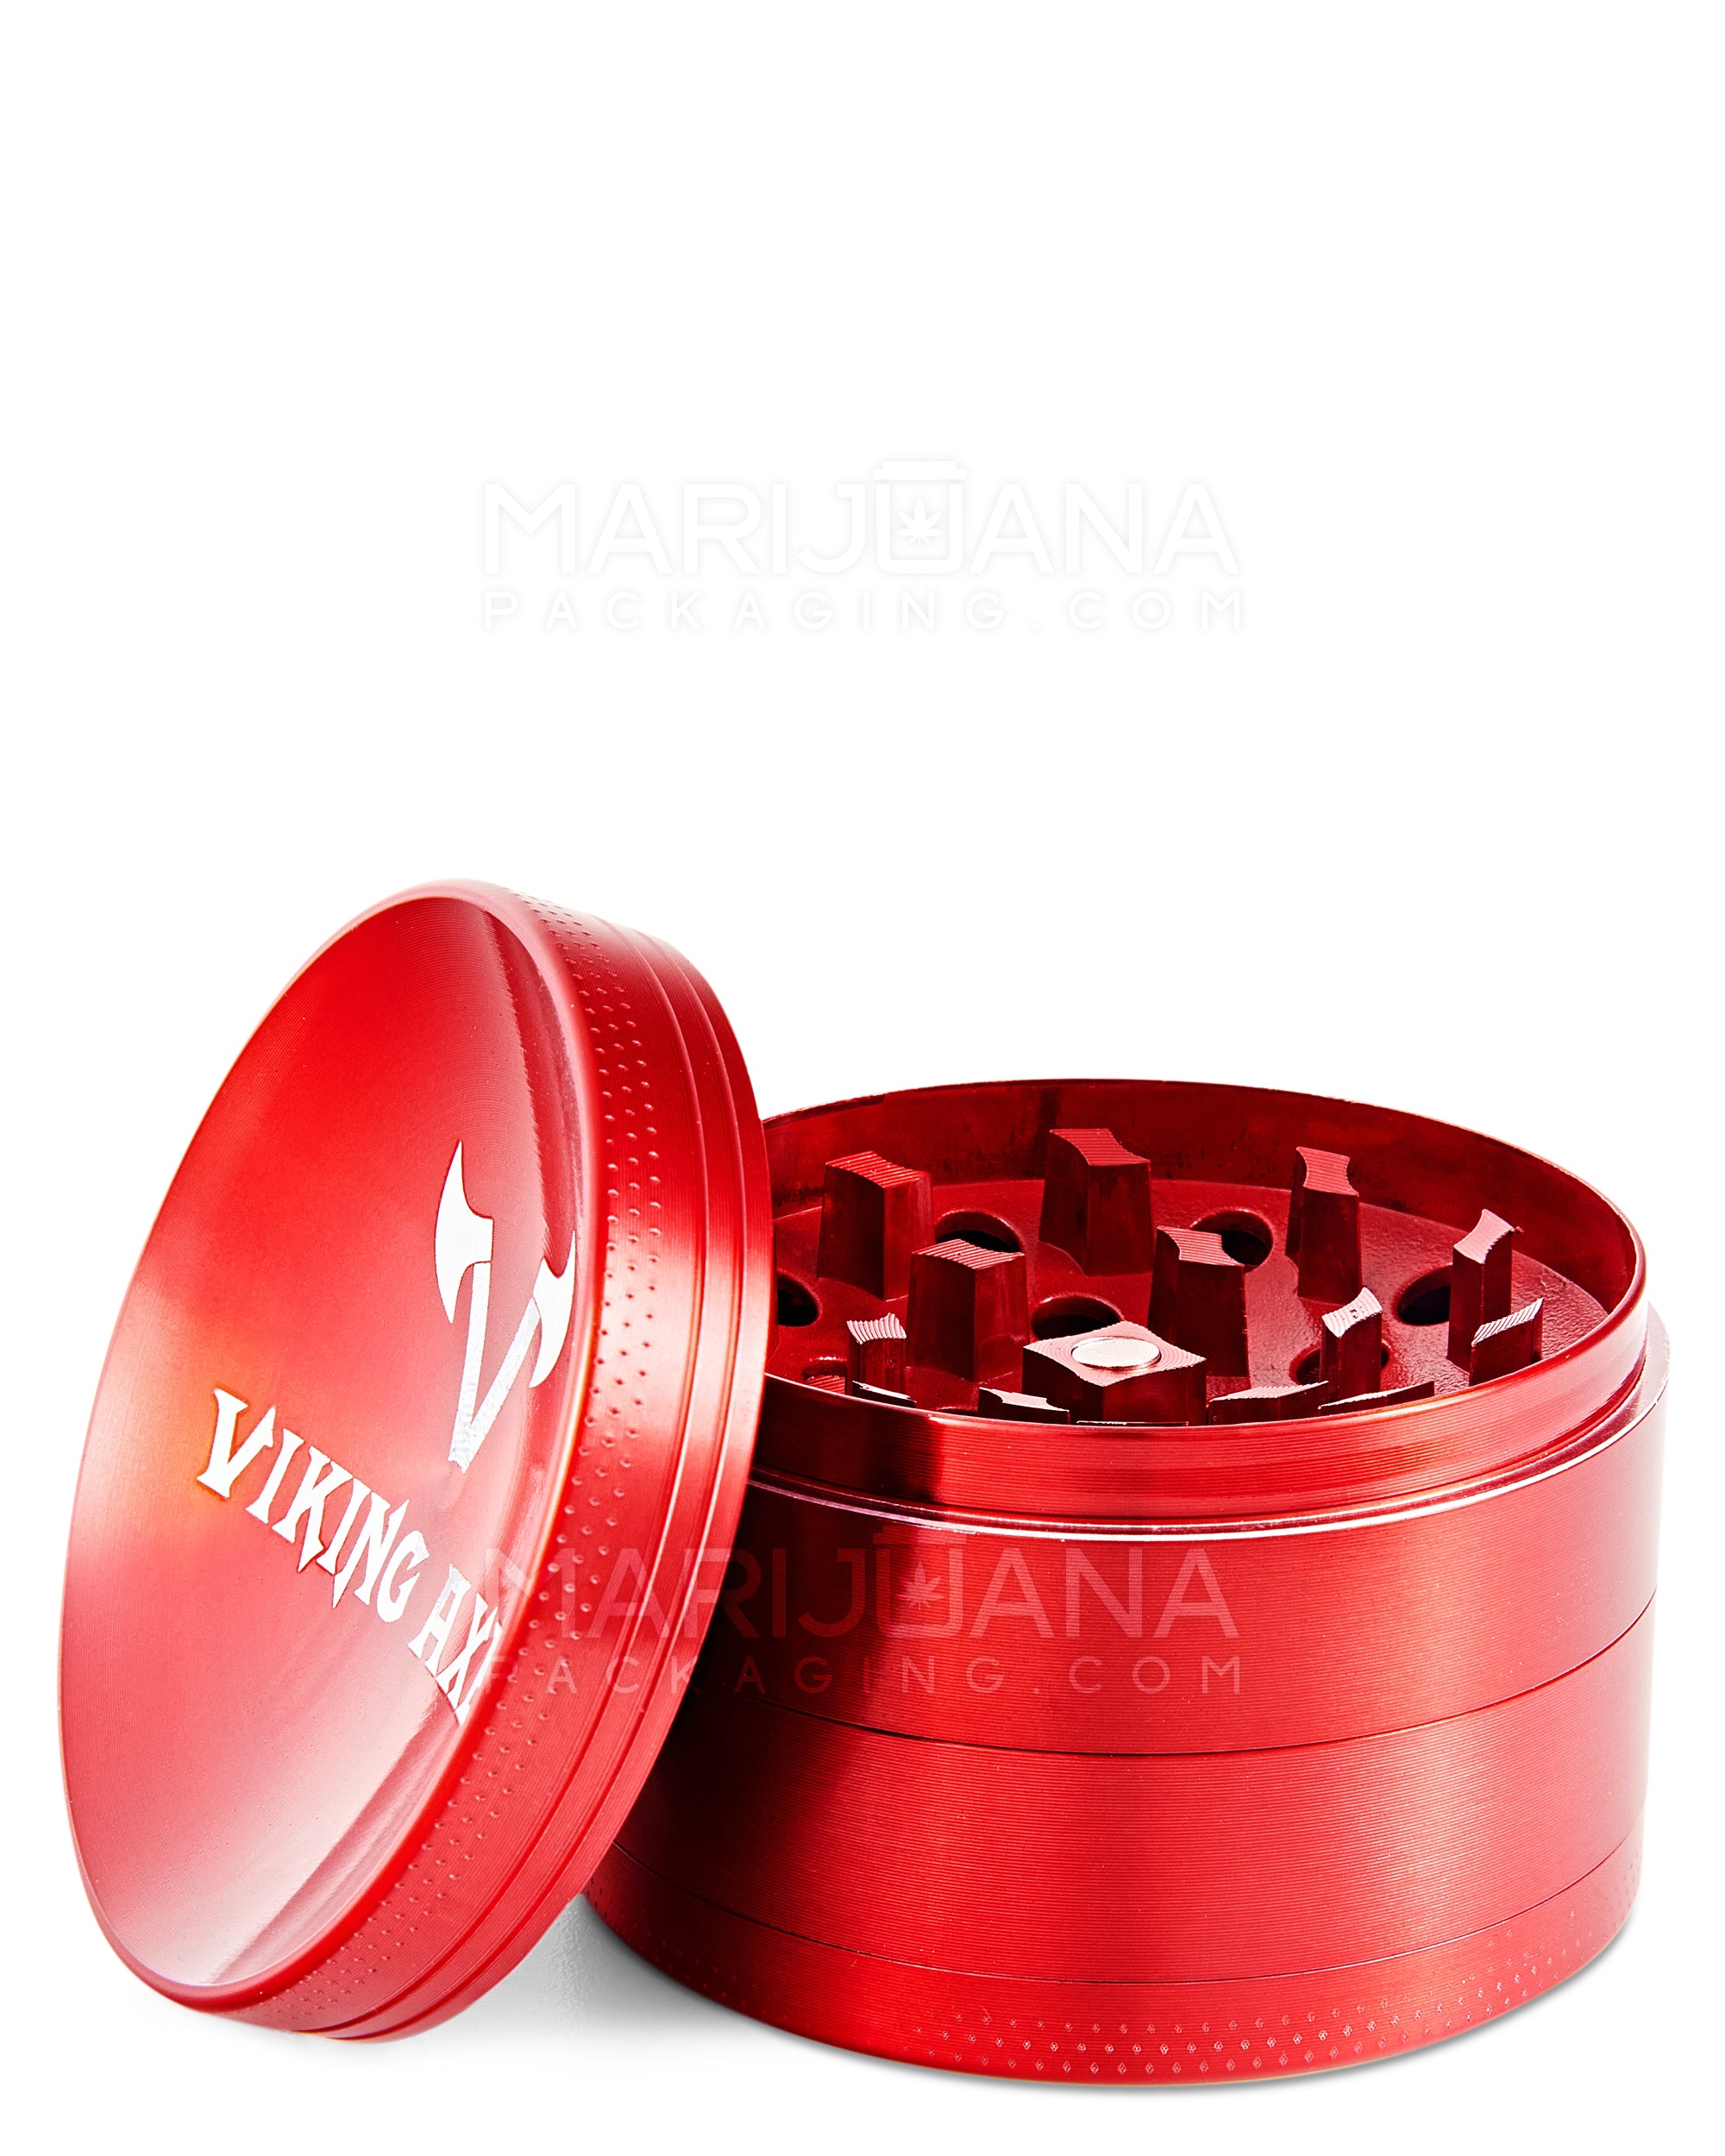 VIKING AXE | Magnetic Metal Grinder w/ Catcher | 4 Piece - 63mm - Red - 1